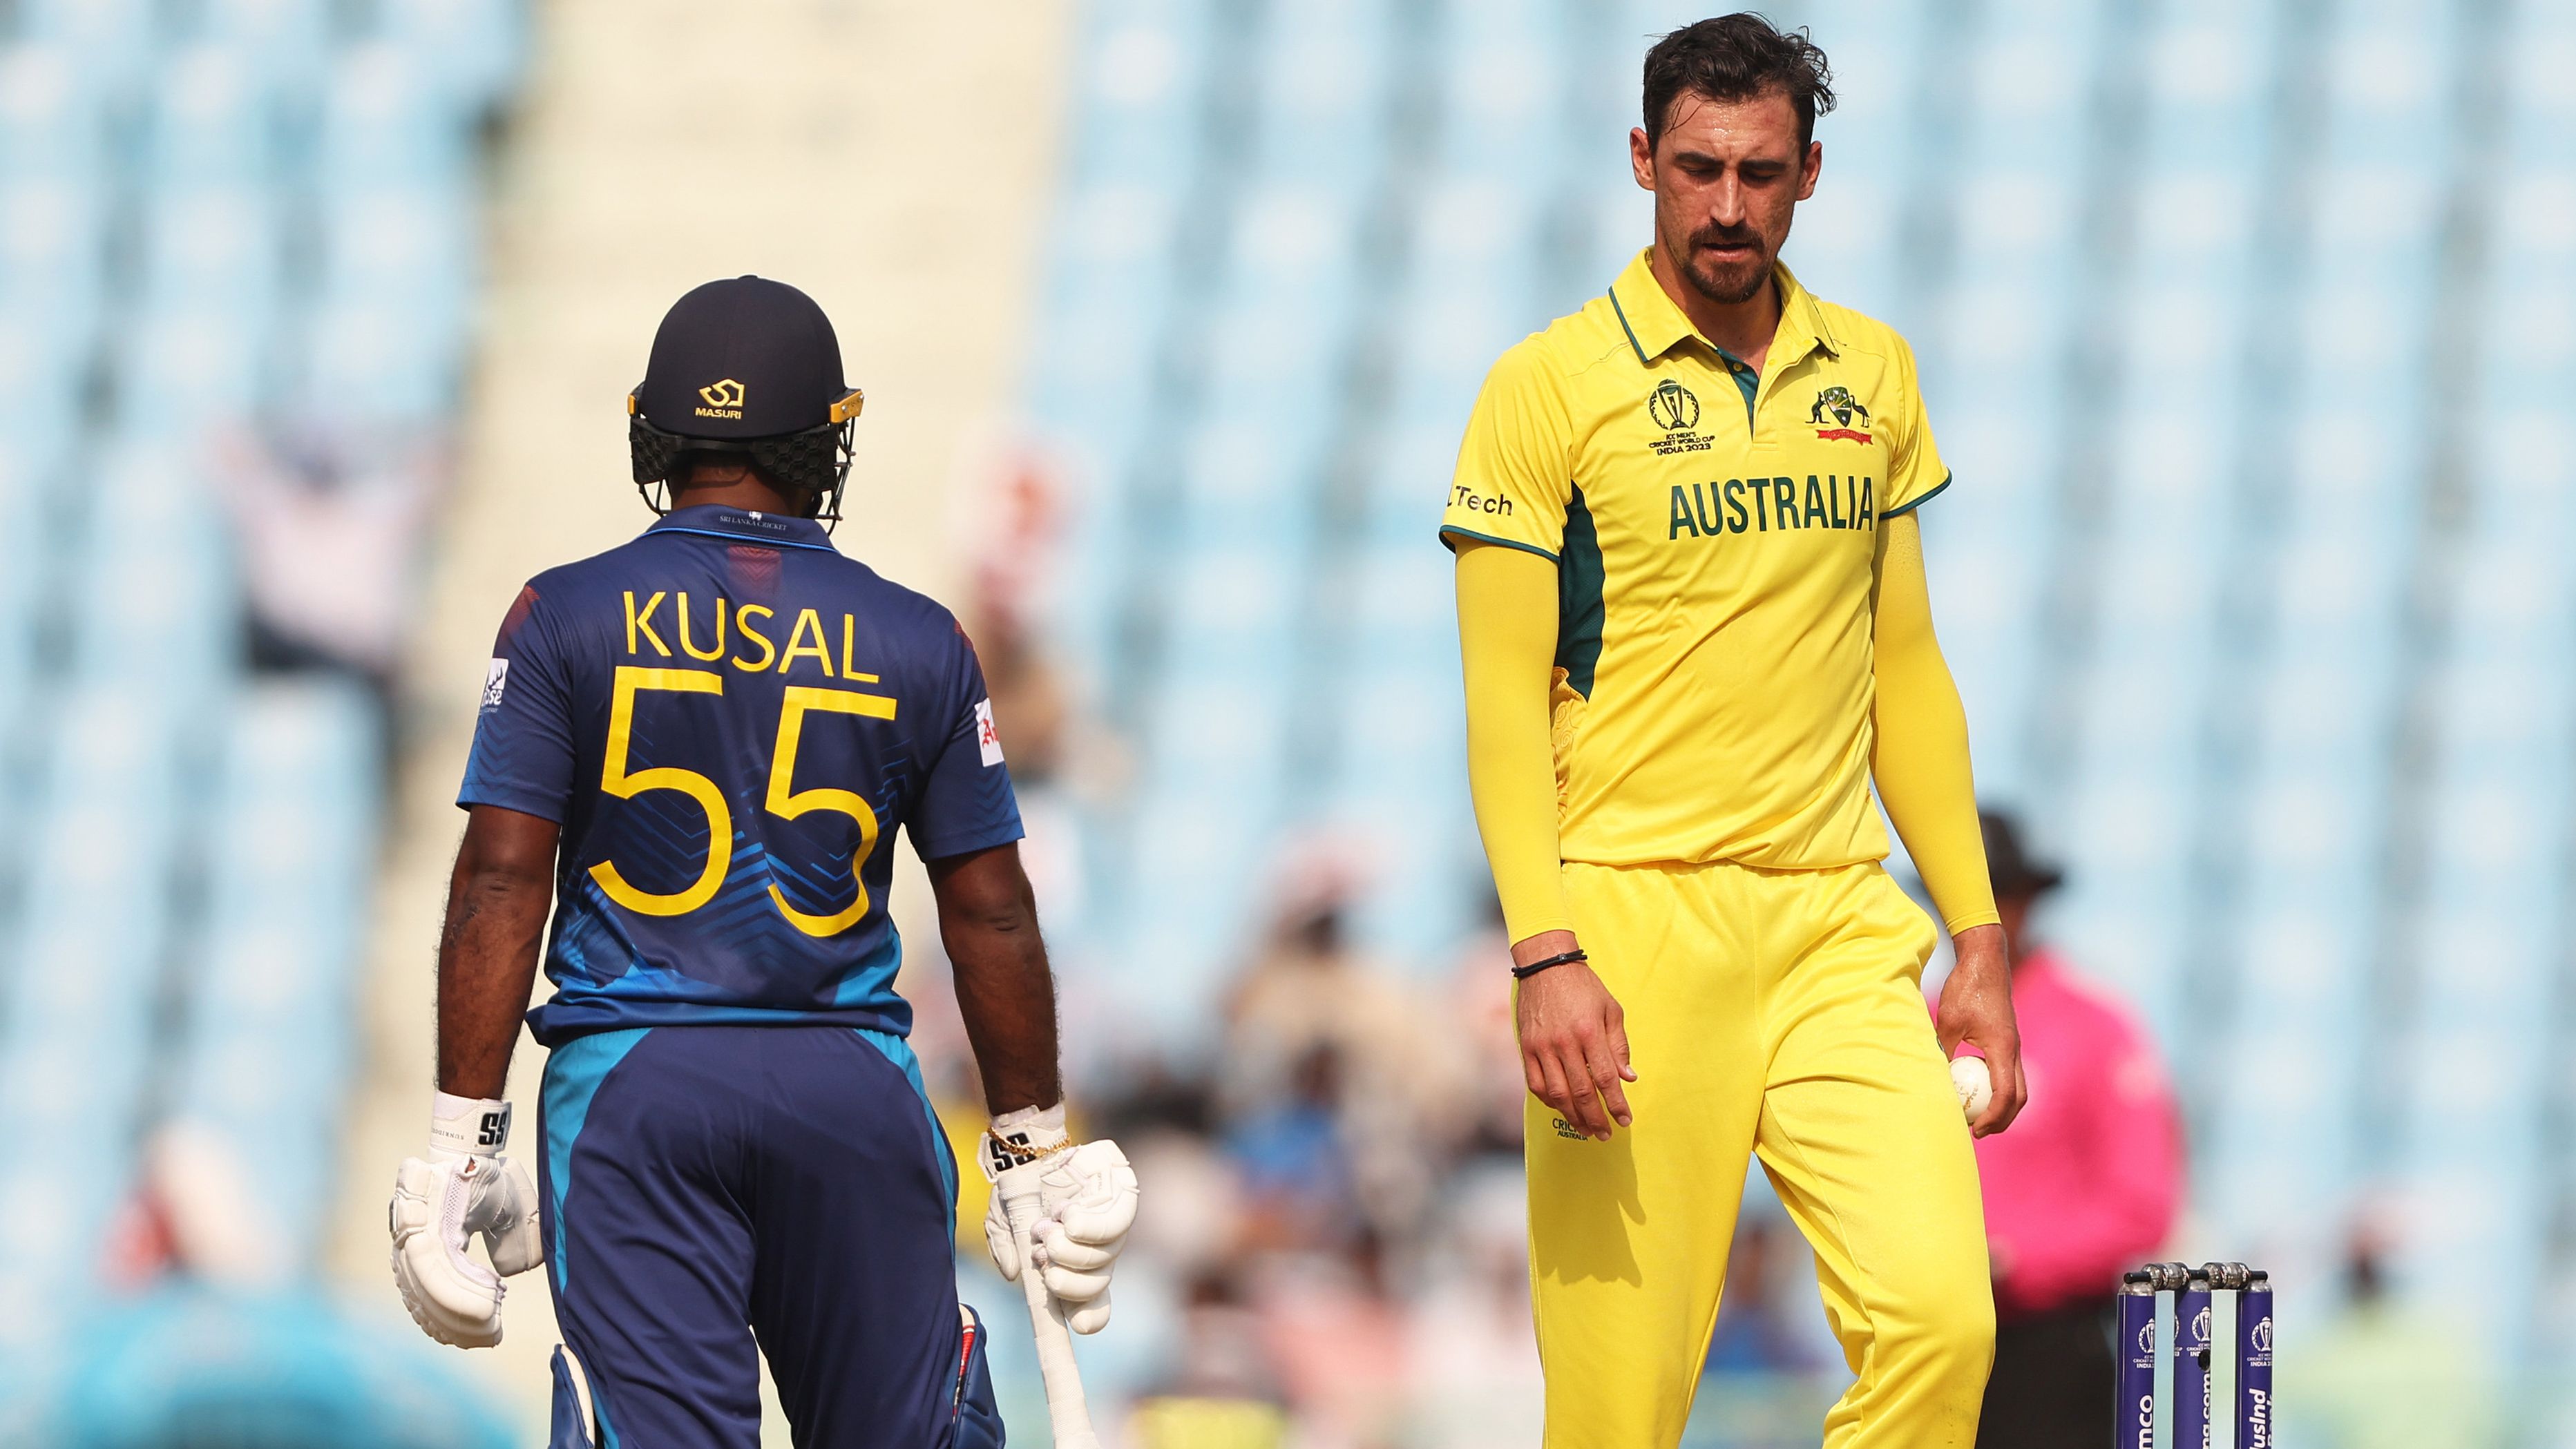 'Burning a lot of energy': Mitchell Starc questioned over 'aggressive' run-in with batters